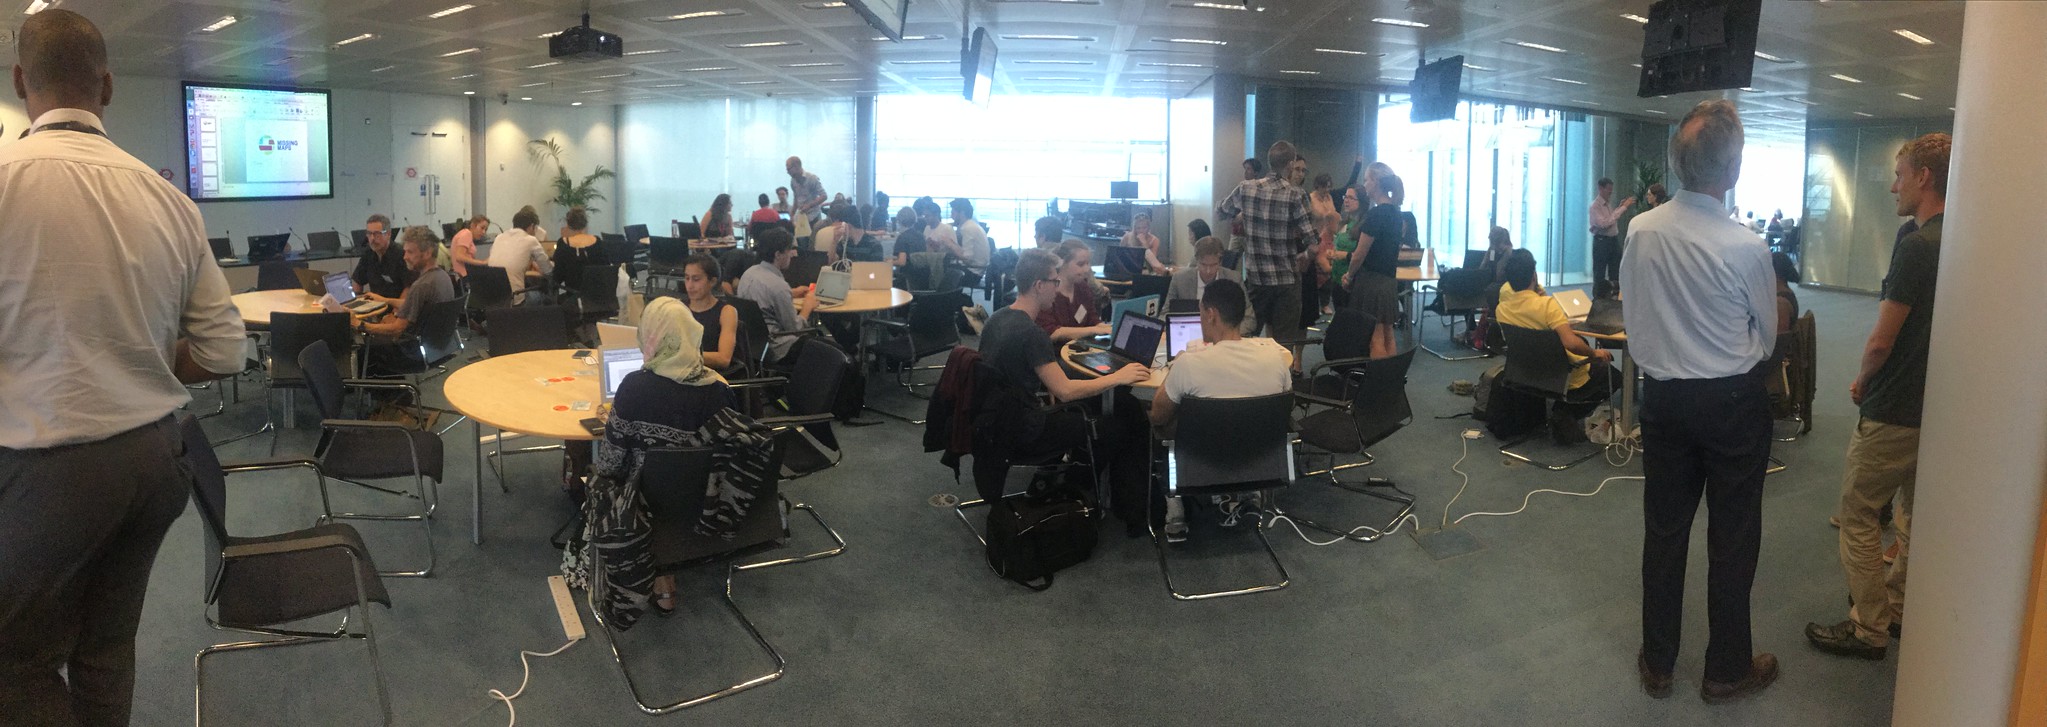 Missing Maps London mapathon in August 2015